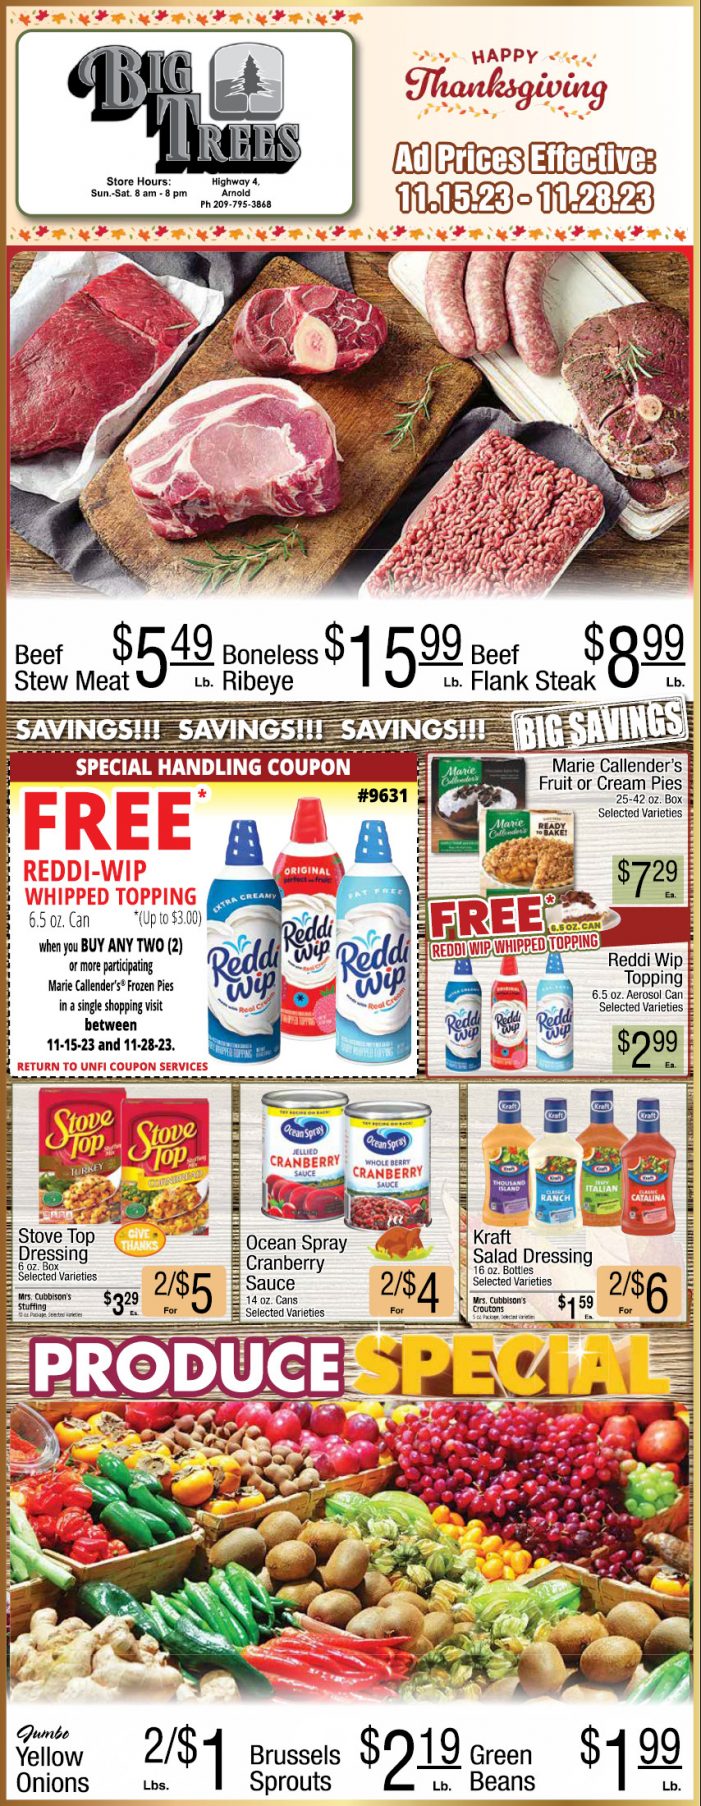 Big Trees Market Big Thanksgiving Ad!  Grocery, Produce, Meat & Deli Specials Through November 28th!  Shop Local & Save!